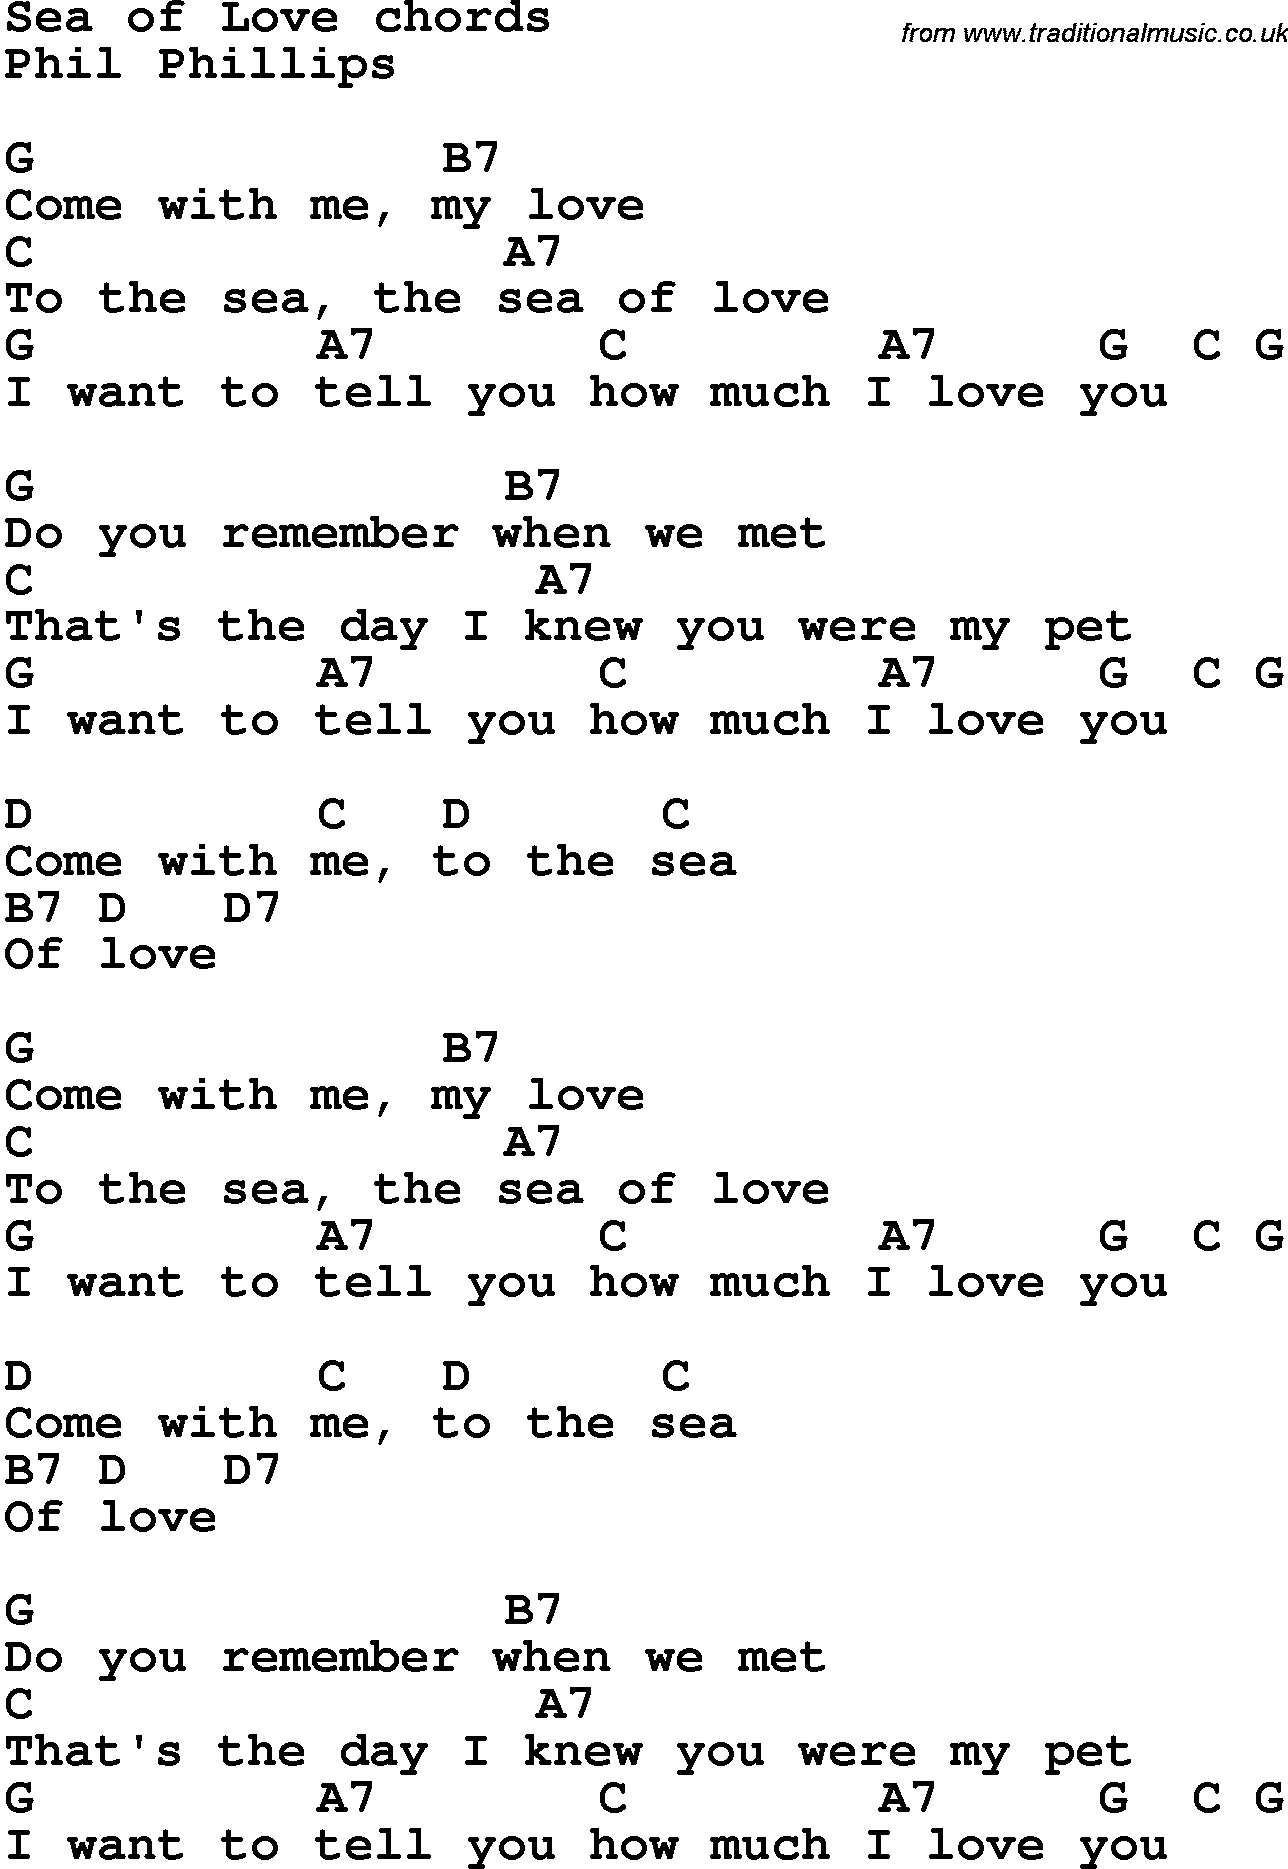 Song Lyrics with guitar chords for Seaof Love